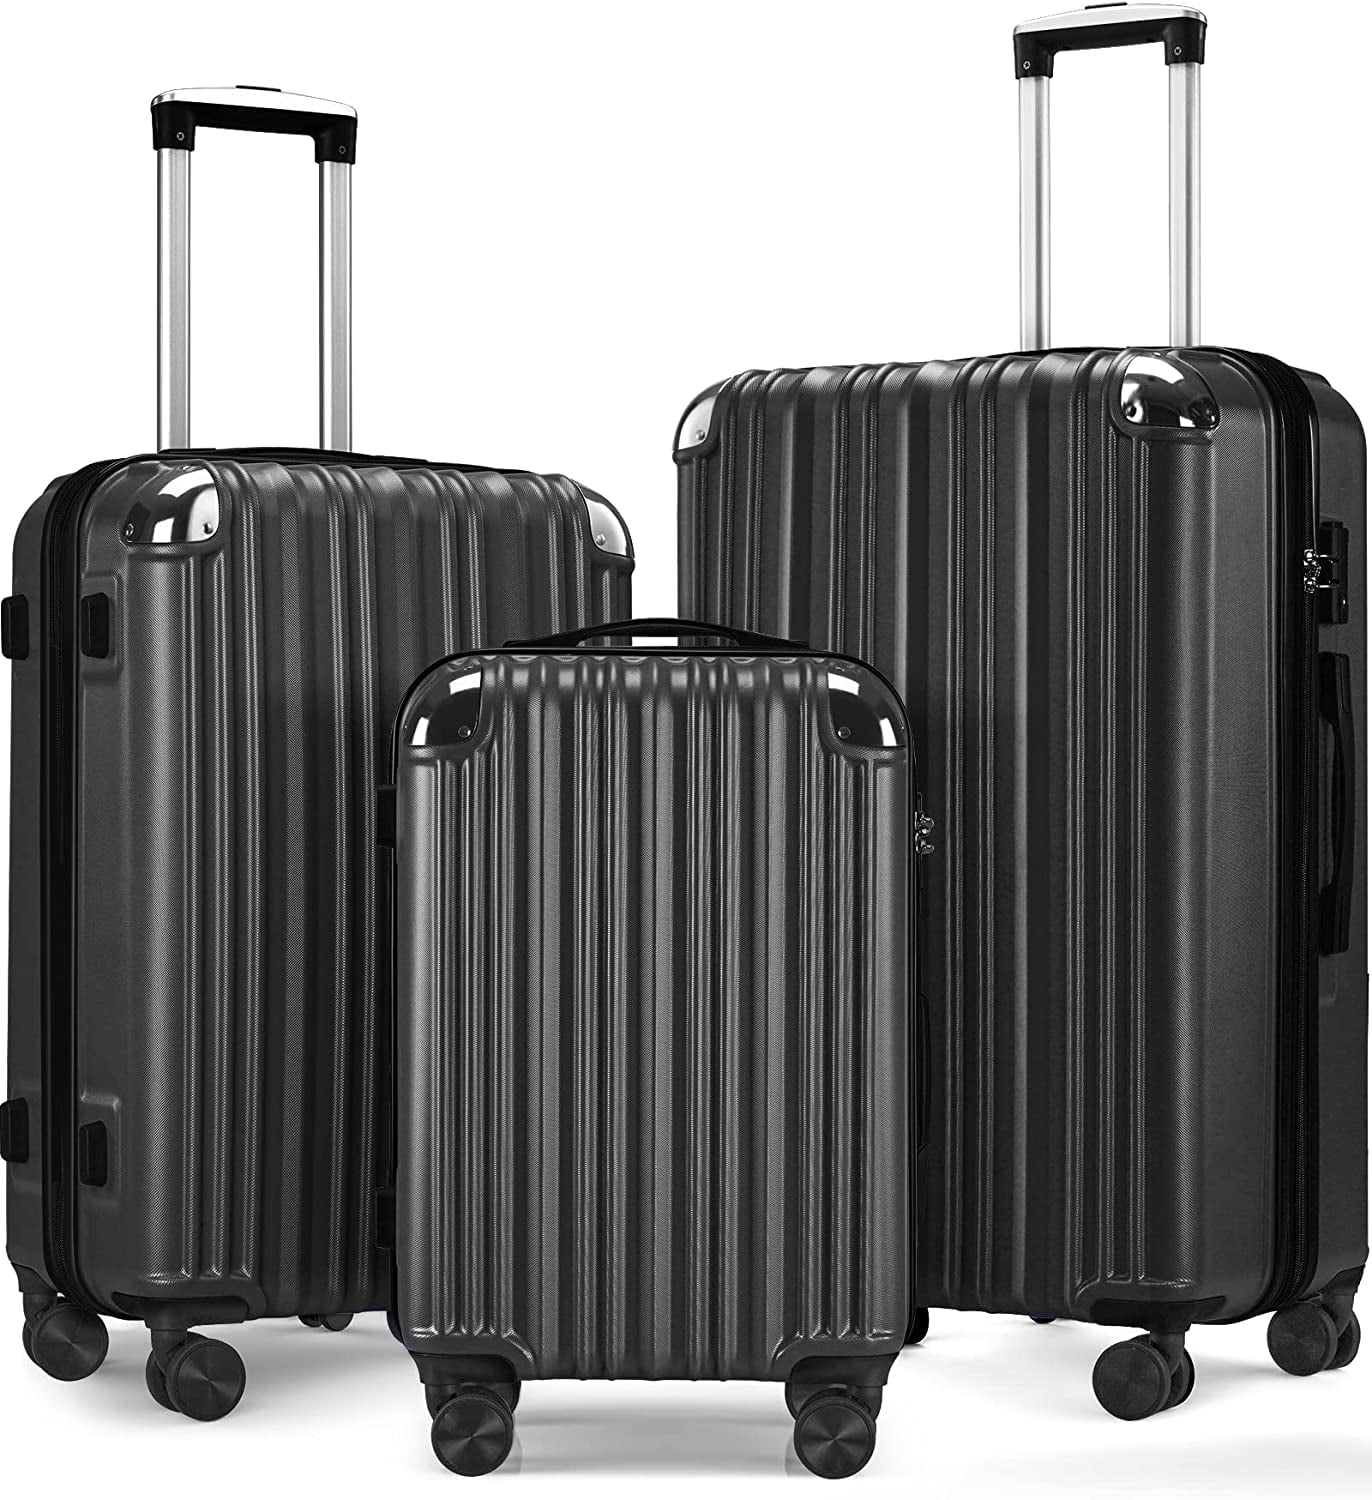 (New Version) 3 Piece Luggage Sets Hard Shell Suitcase Set with Spinner ...